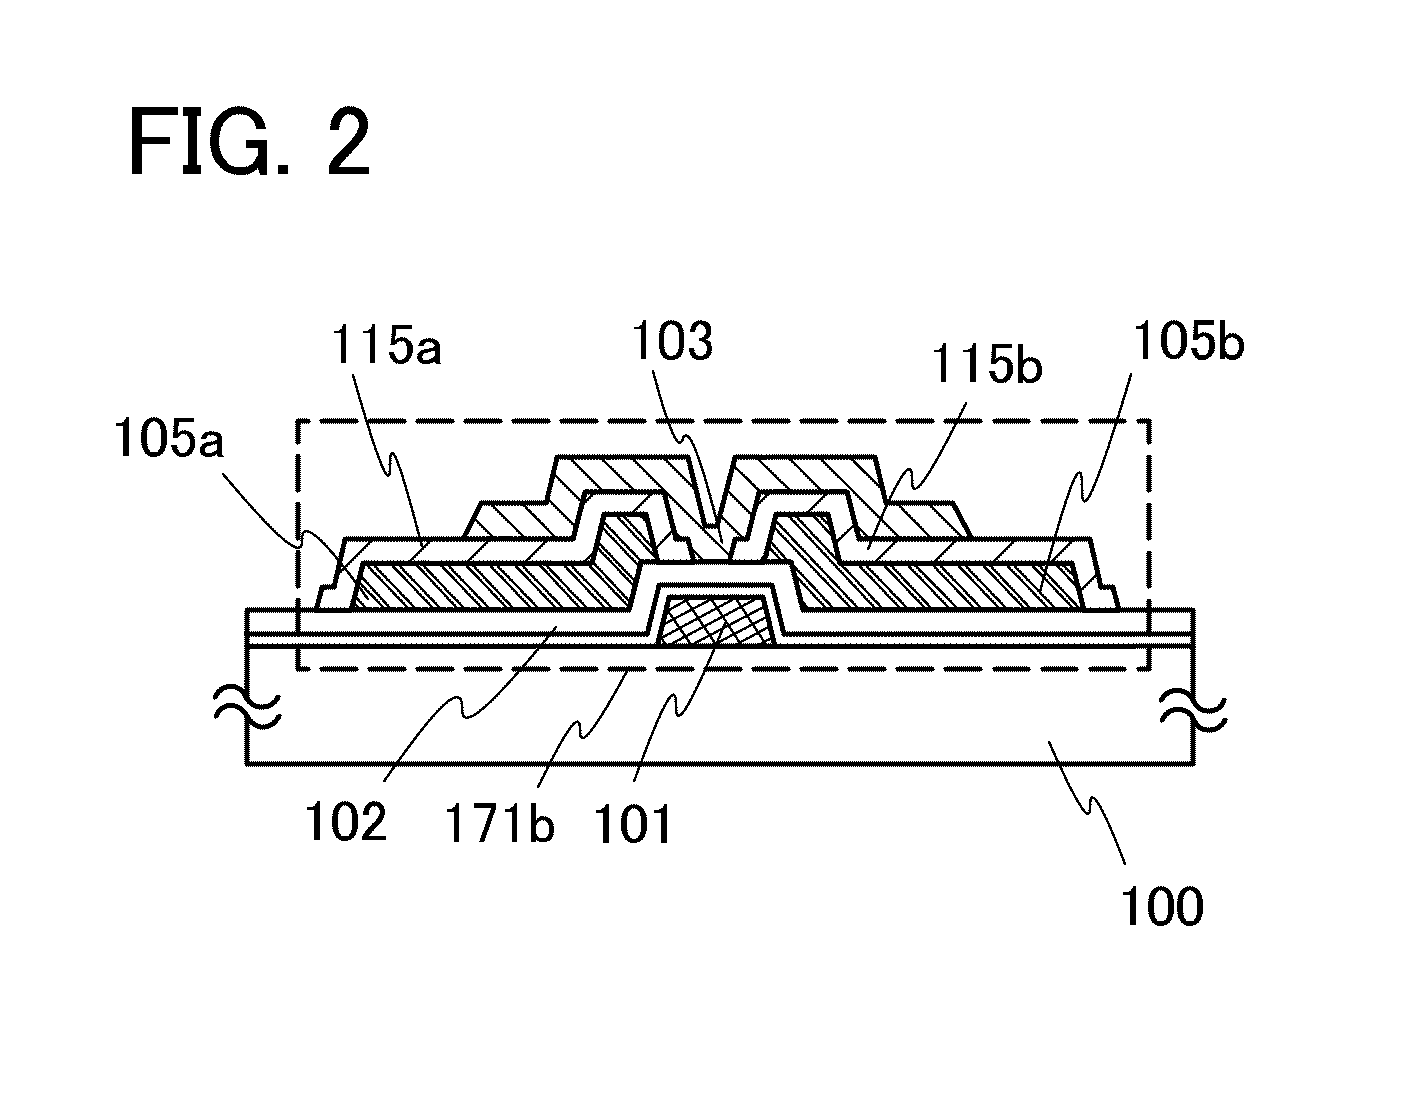 Semiconductor device with oxide semiconductor formed within